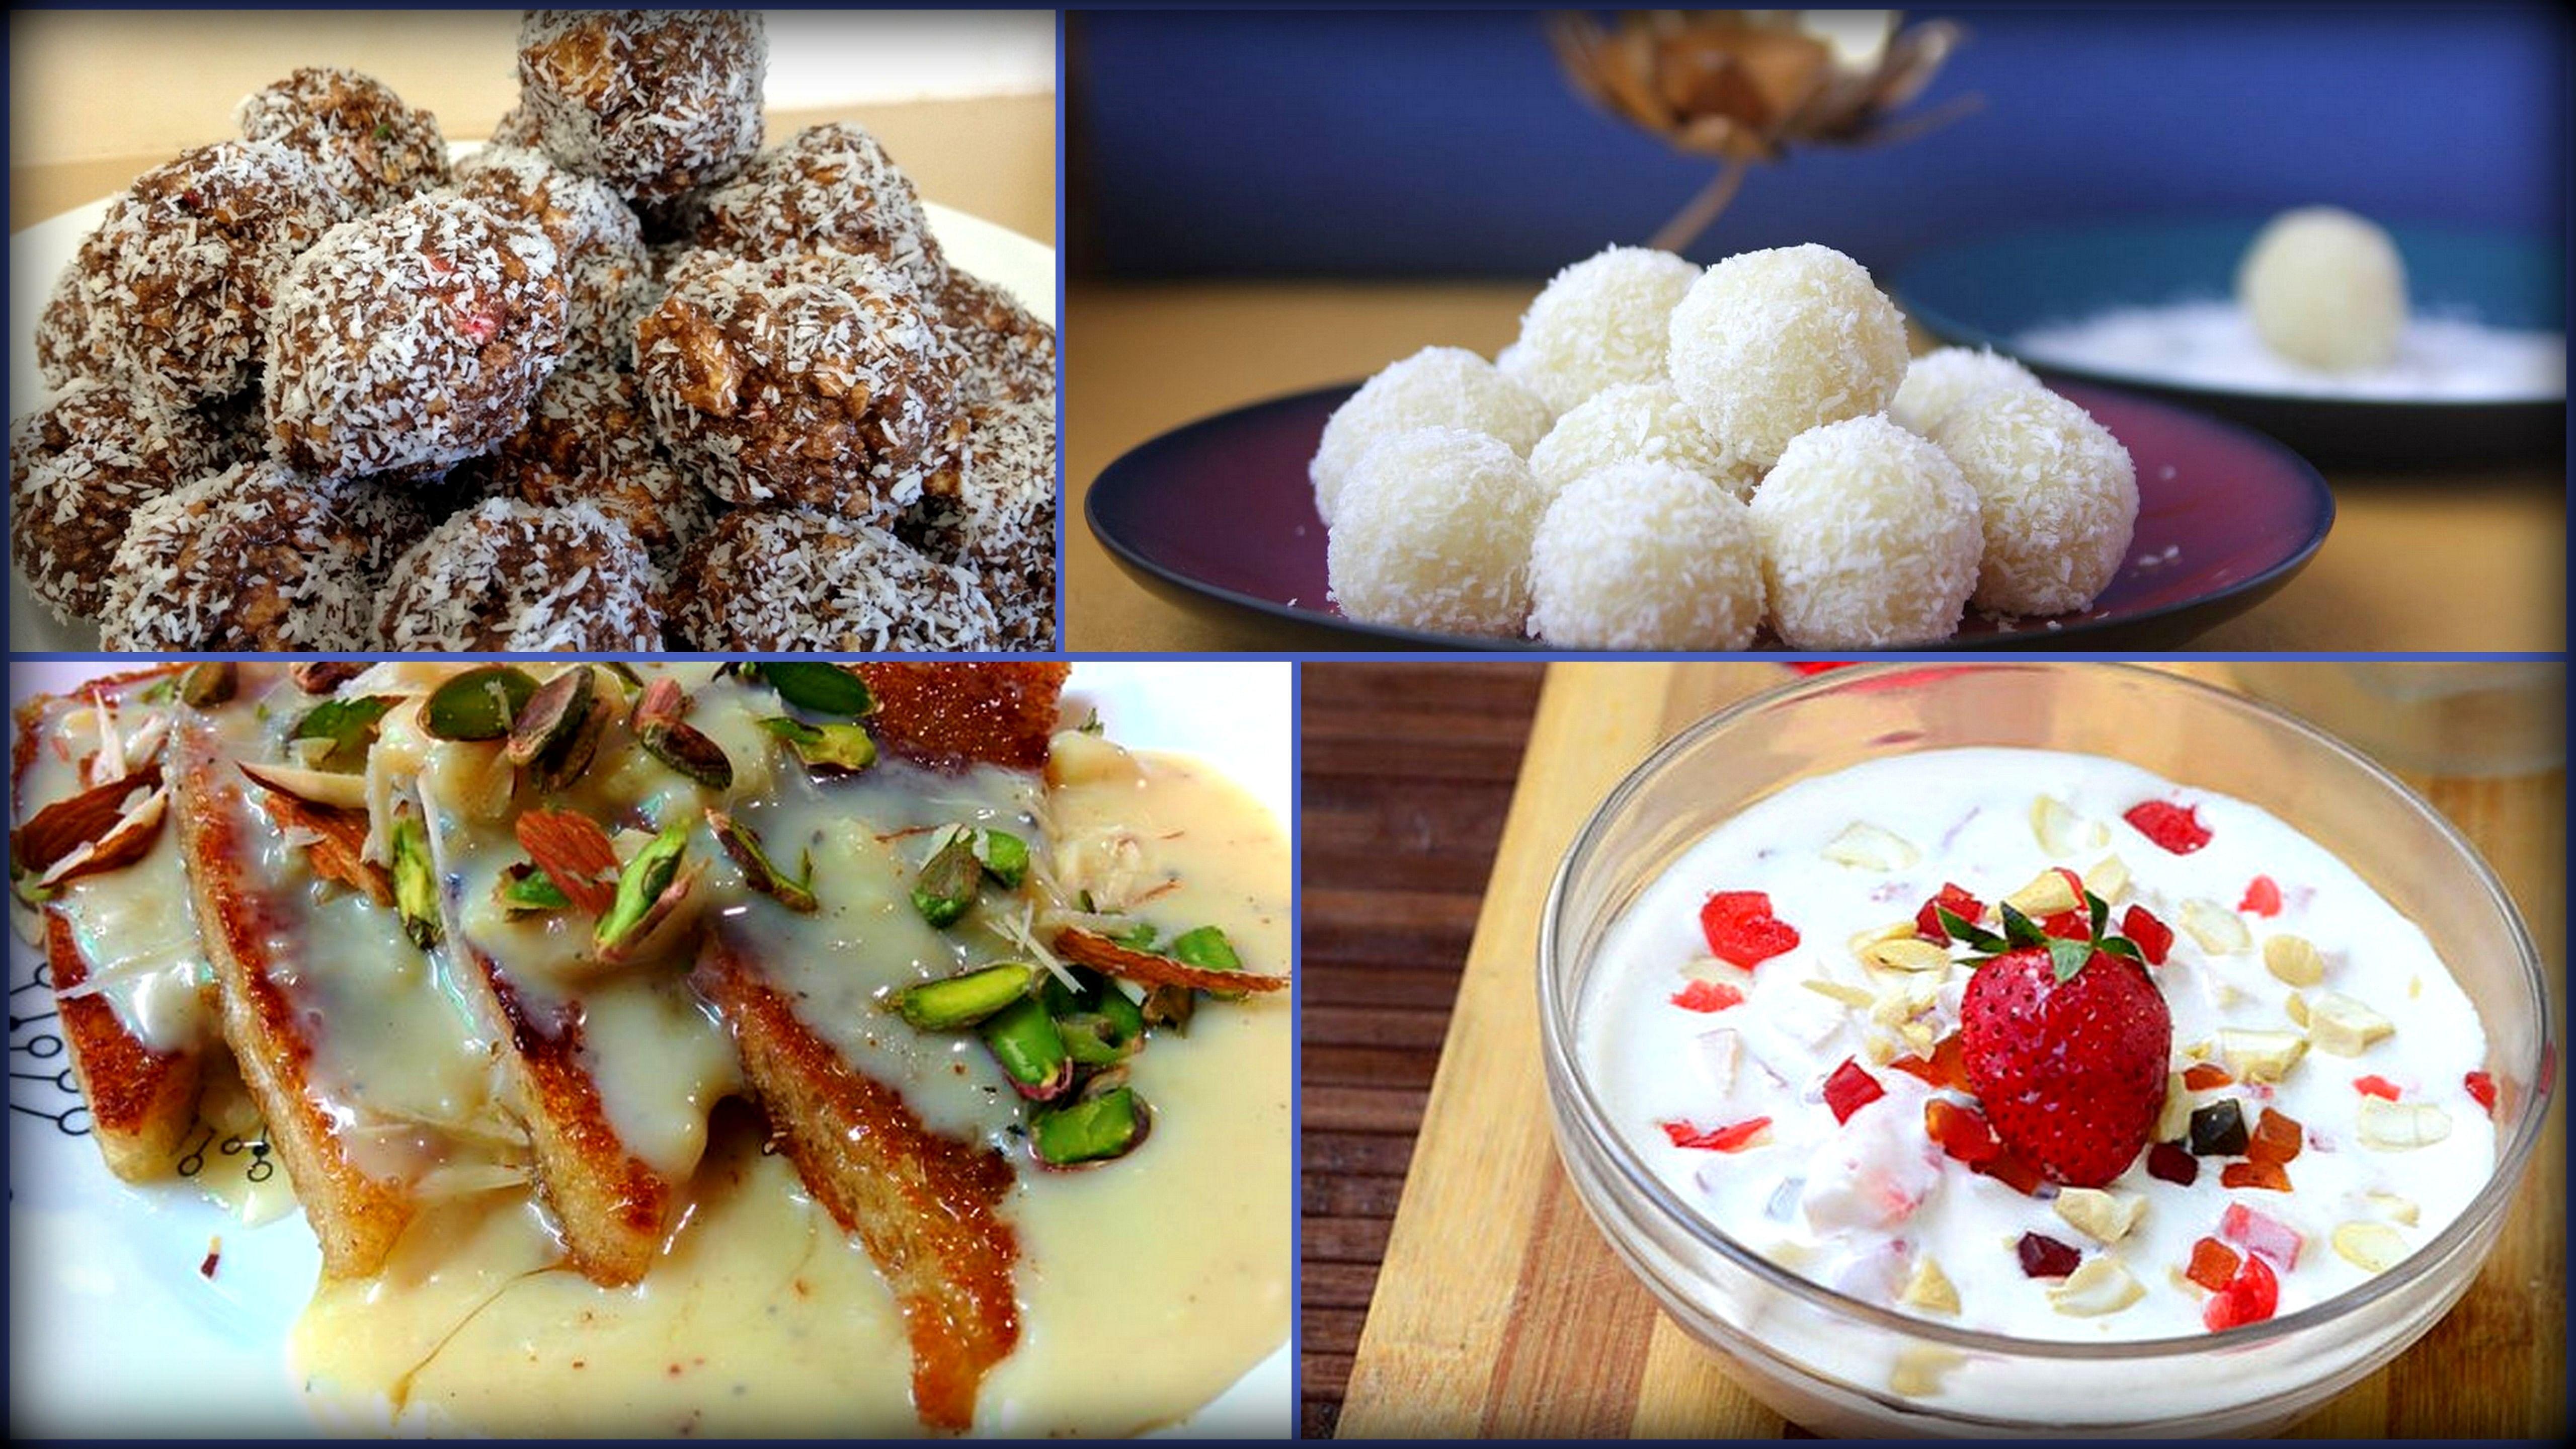 QUICK 5 MINUTE RECIPES FOR THIS DIWALI